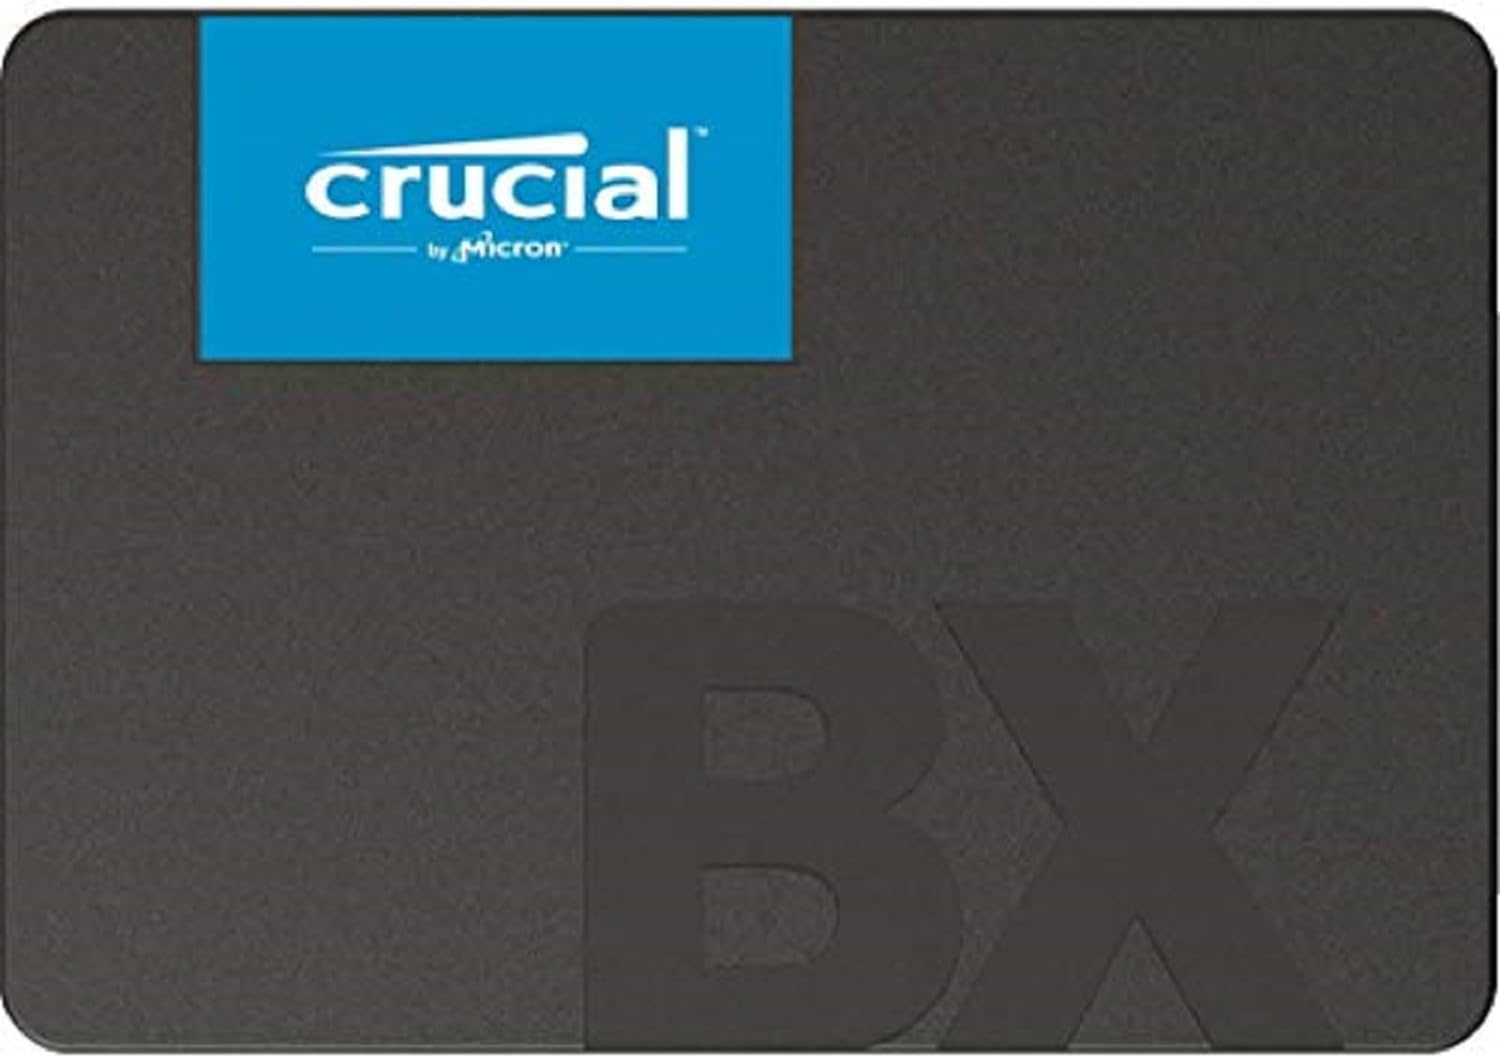 Crucial BX500 2TB 3D NAND SATA 2.5-Inch Internal SSD, up to 540MB/s - CT2000BX500SSD1, Solid State Hard Drive